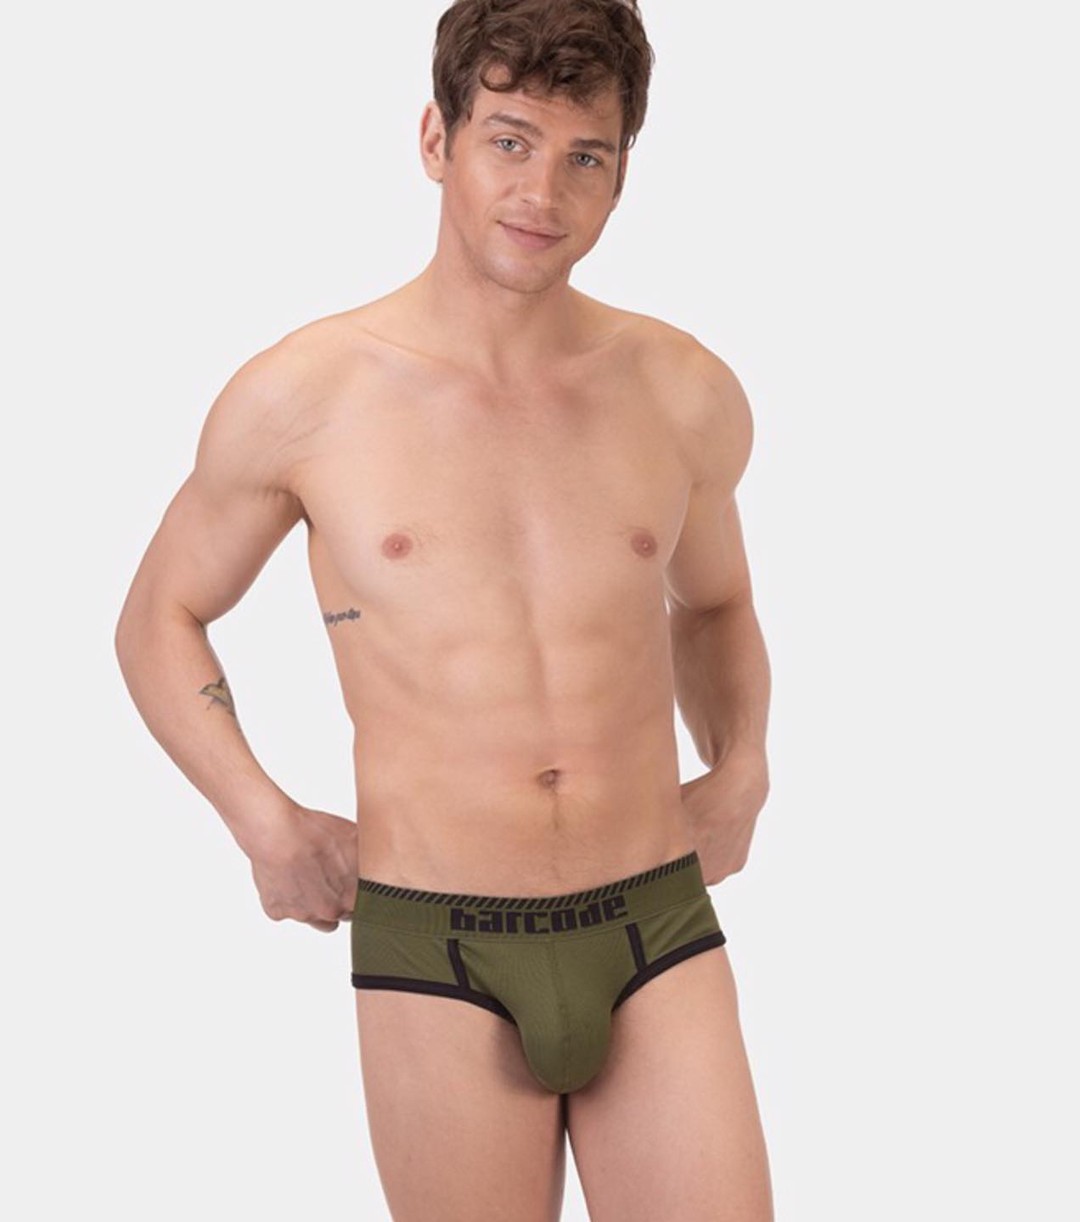 Back in stock, the spacious, retro styled briefs Solger in khaki with black details by Barcode. Make it yours:
https://menandunderwear.com/shop/underwear/barcode-berlin-solger-briefs-green-black